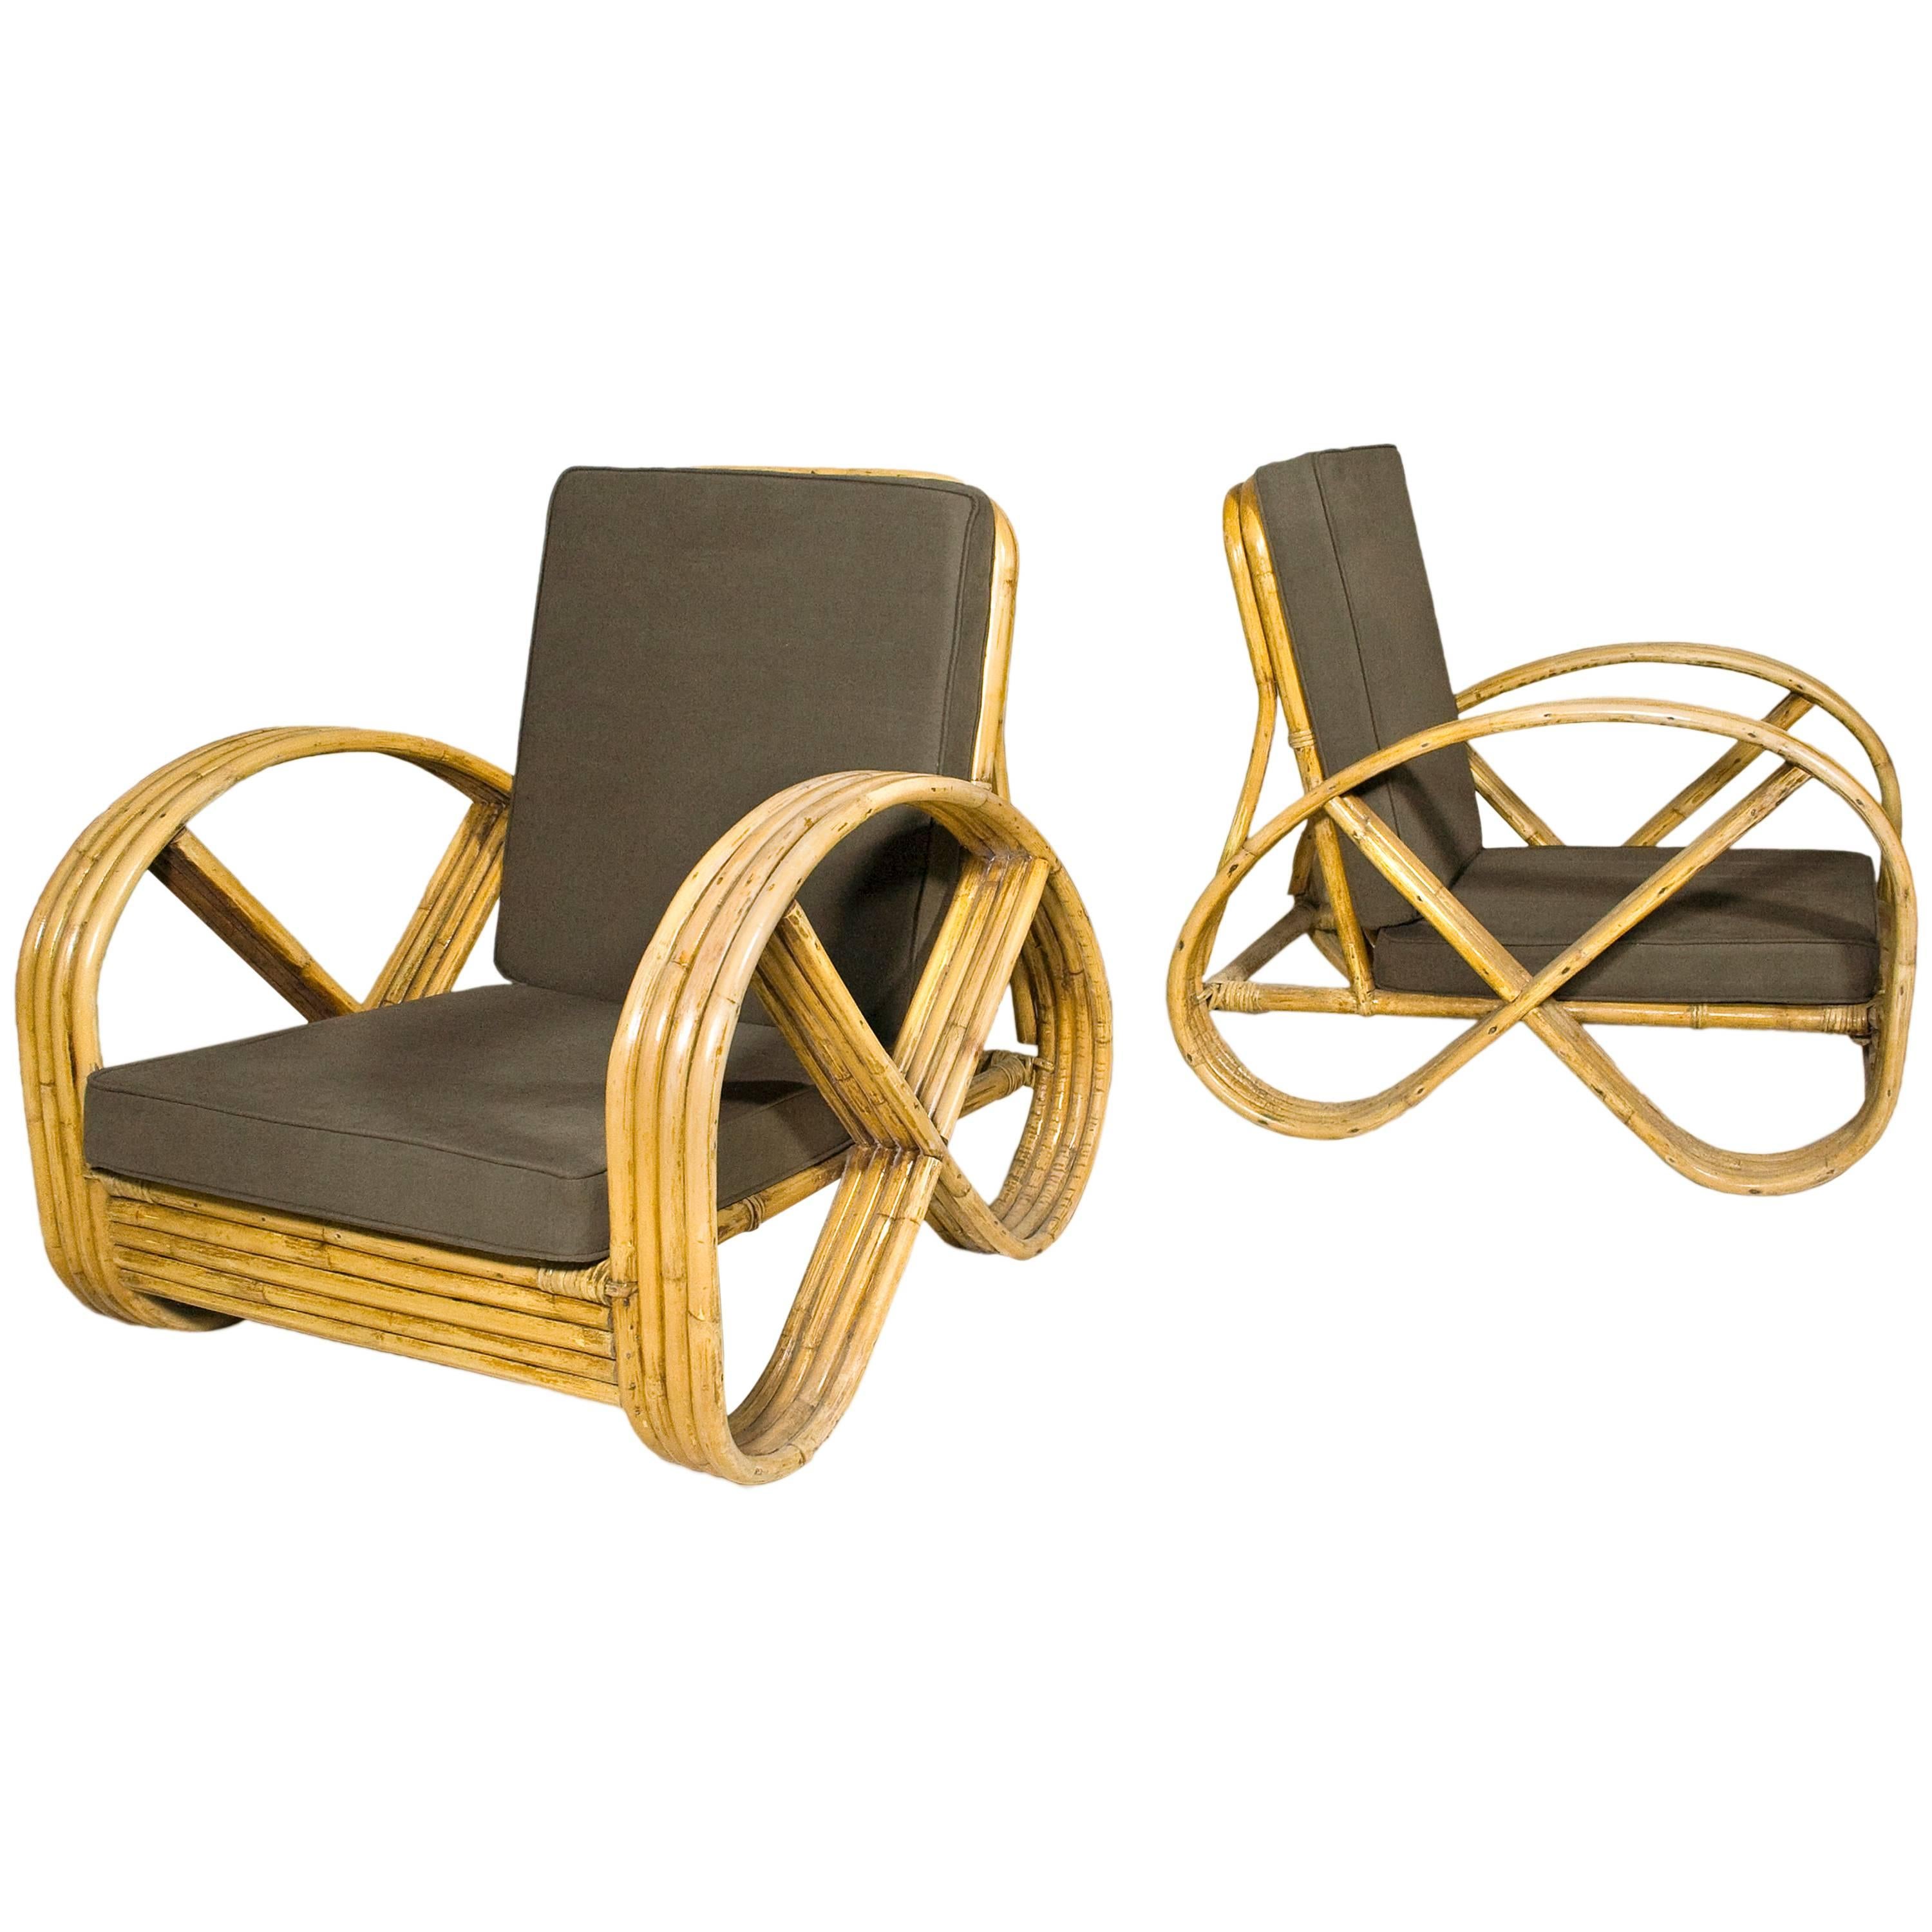 Pair of Vintage Rattan Lounge Armchairs, circa 1940, France